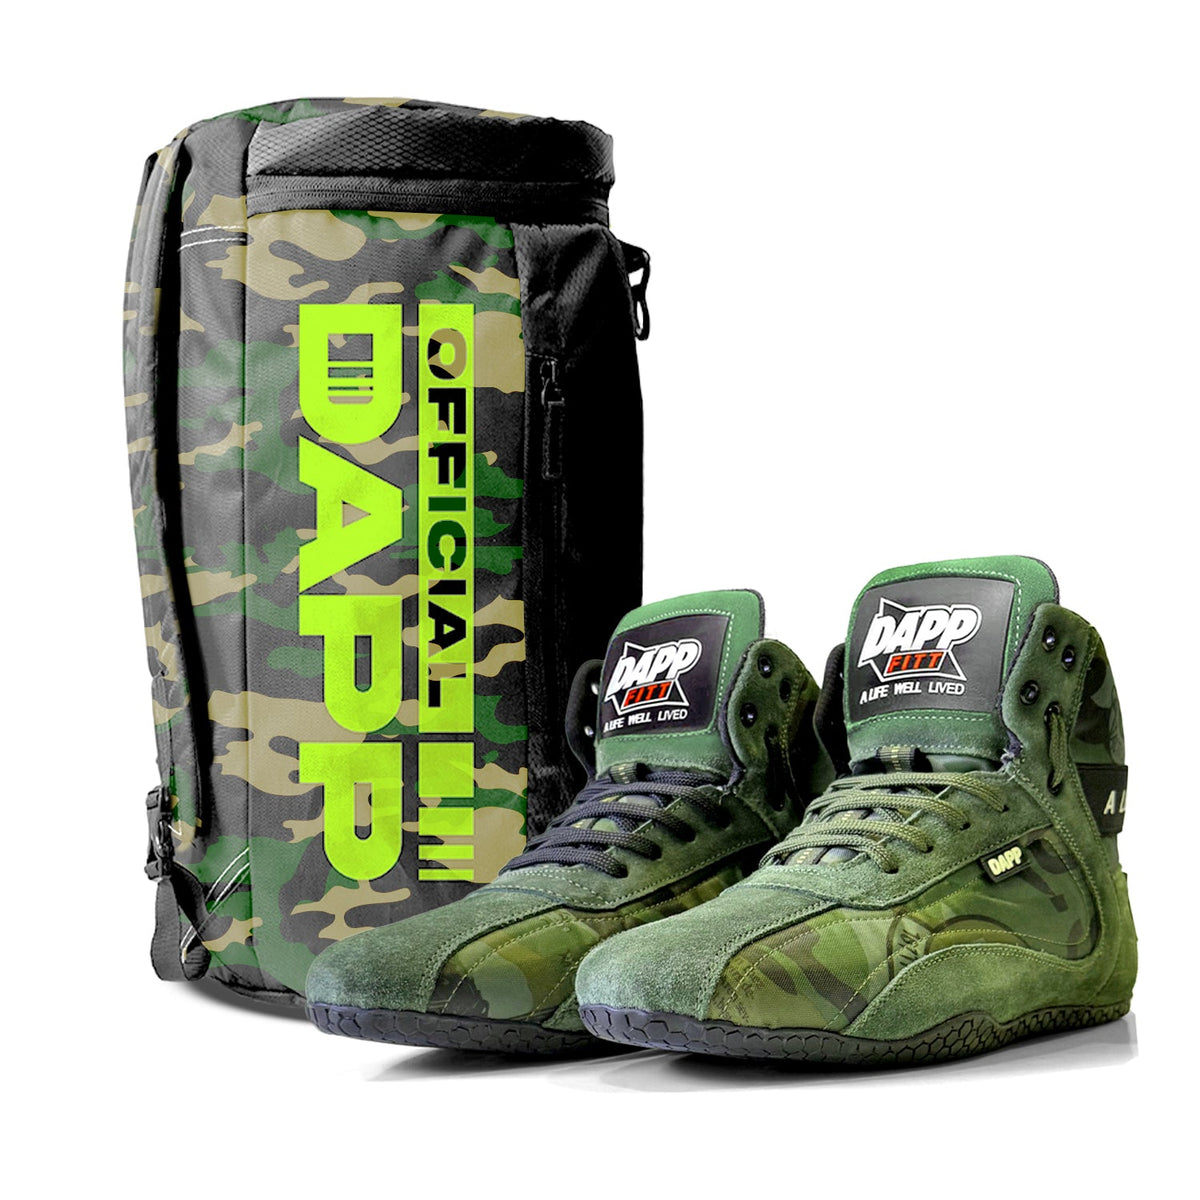 DAPP ActiveKit Weightlifting Camo Shoes and Athletic Duffle Bag Camo